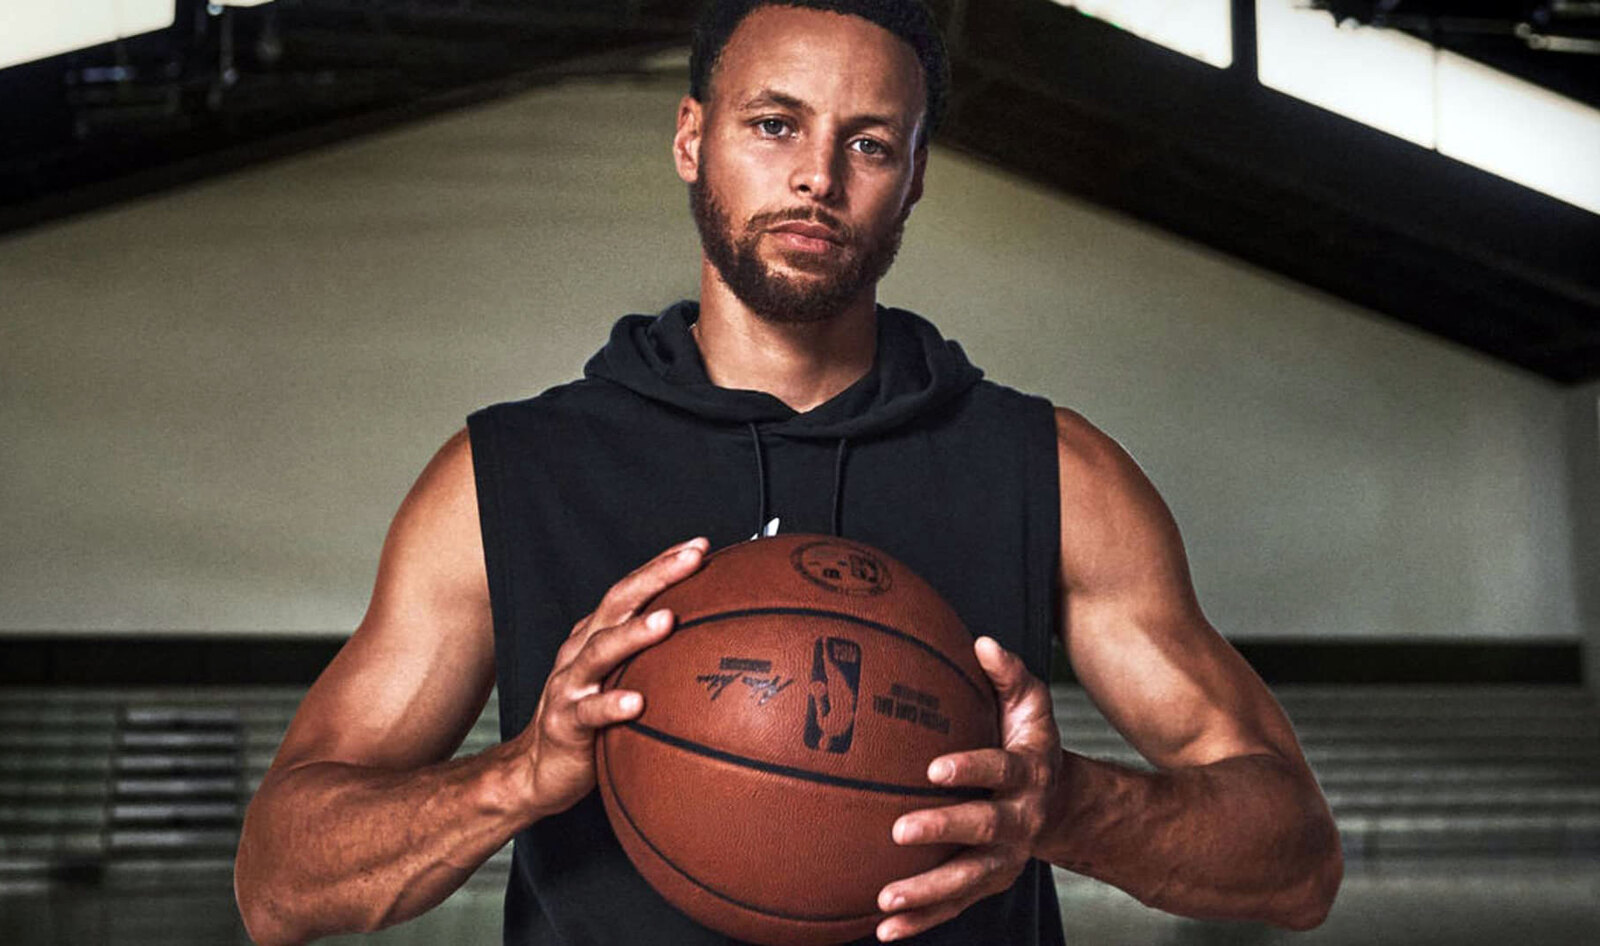 Could Steph Curry Be the Next Basketball Player to Ditch Meat? How the Vegan Diet Became the NBA's New Normal.